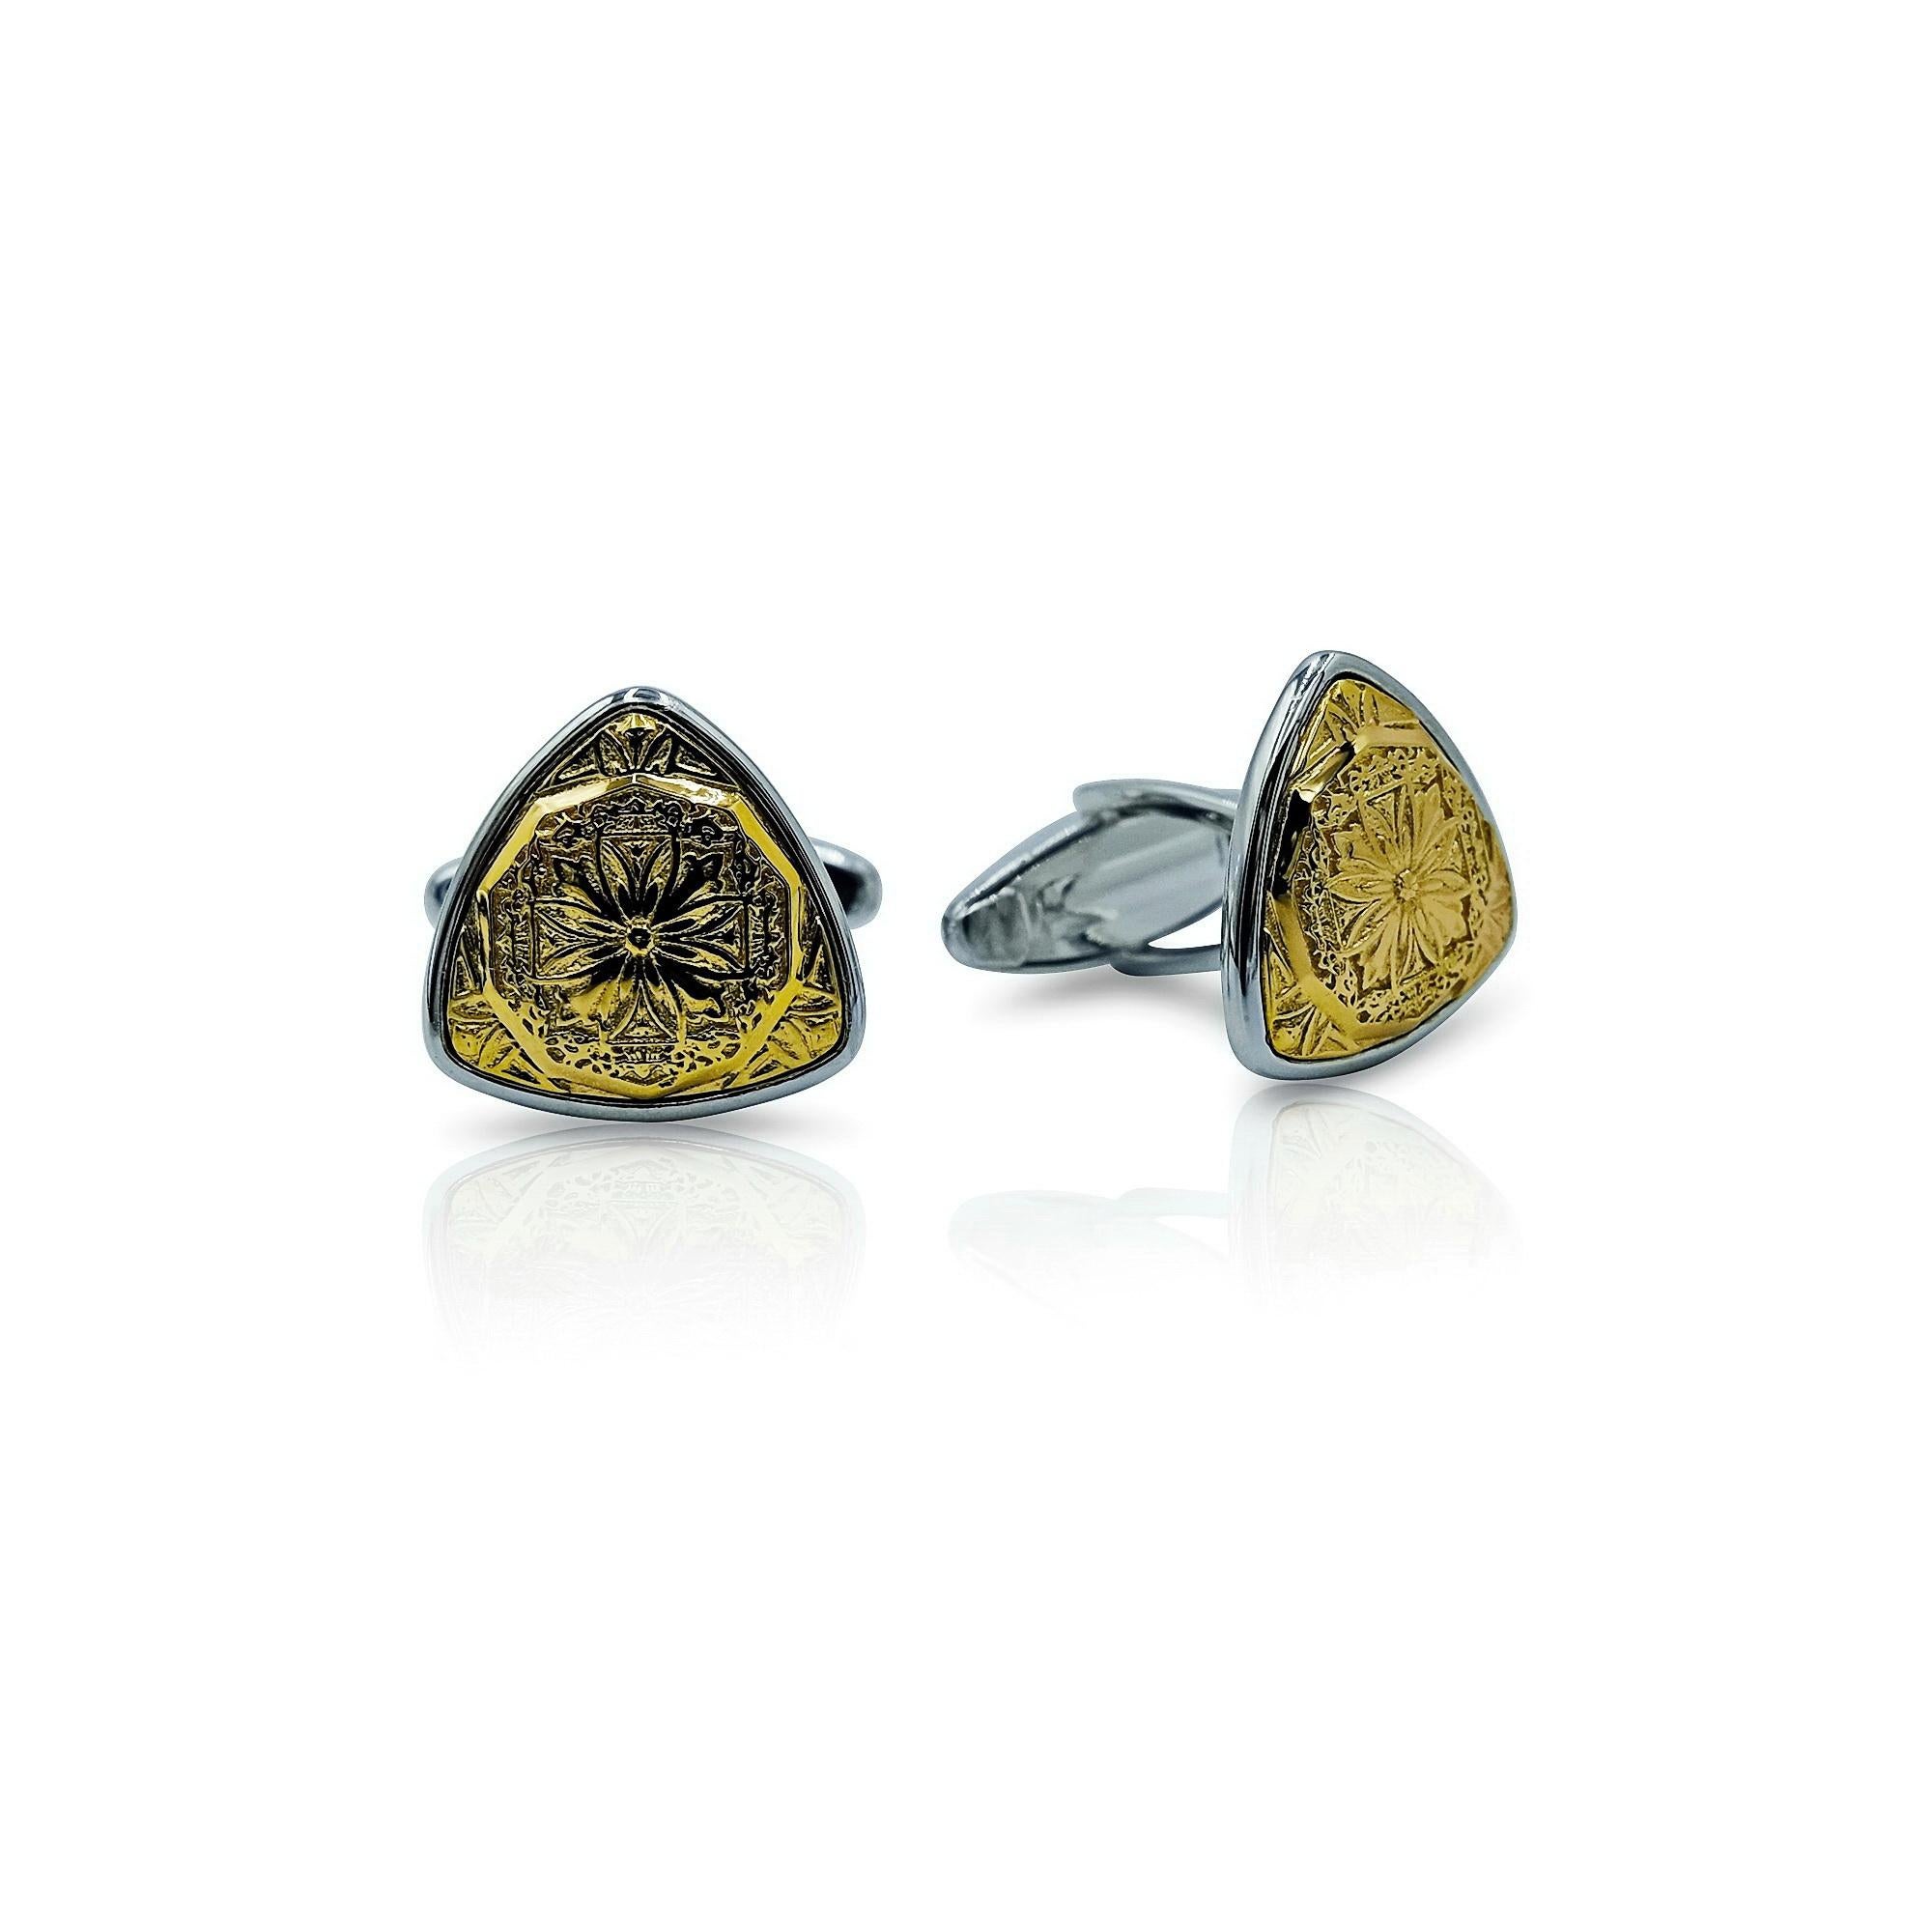 Luca Jouel Decorative Cufflinks Trio in Yellow Gold and Silver For Sale 3